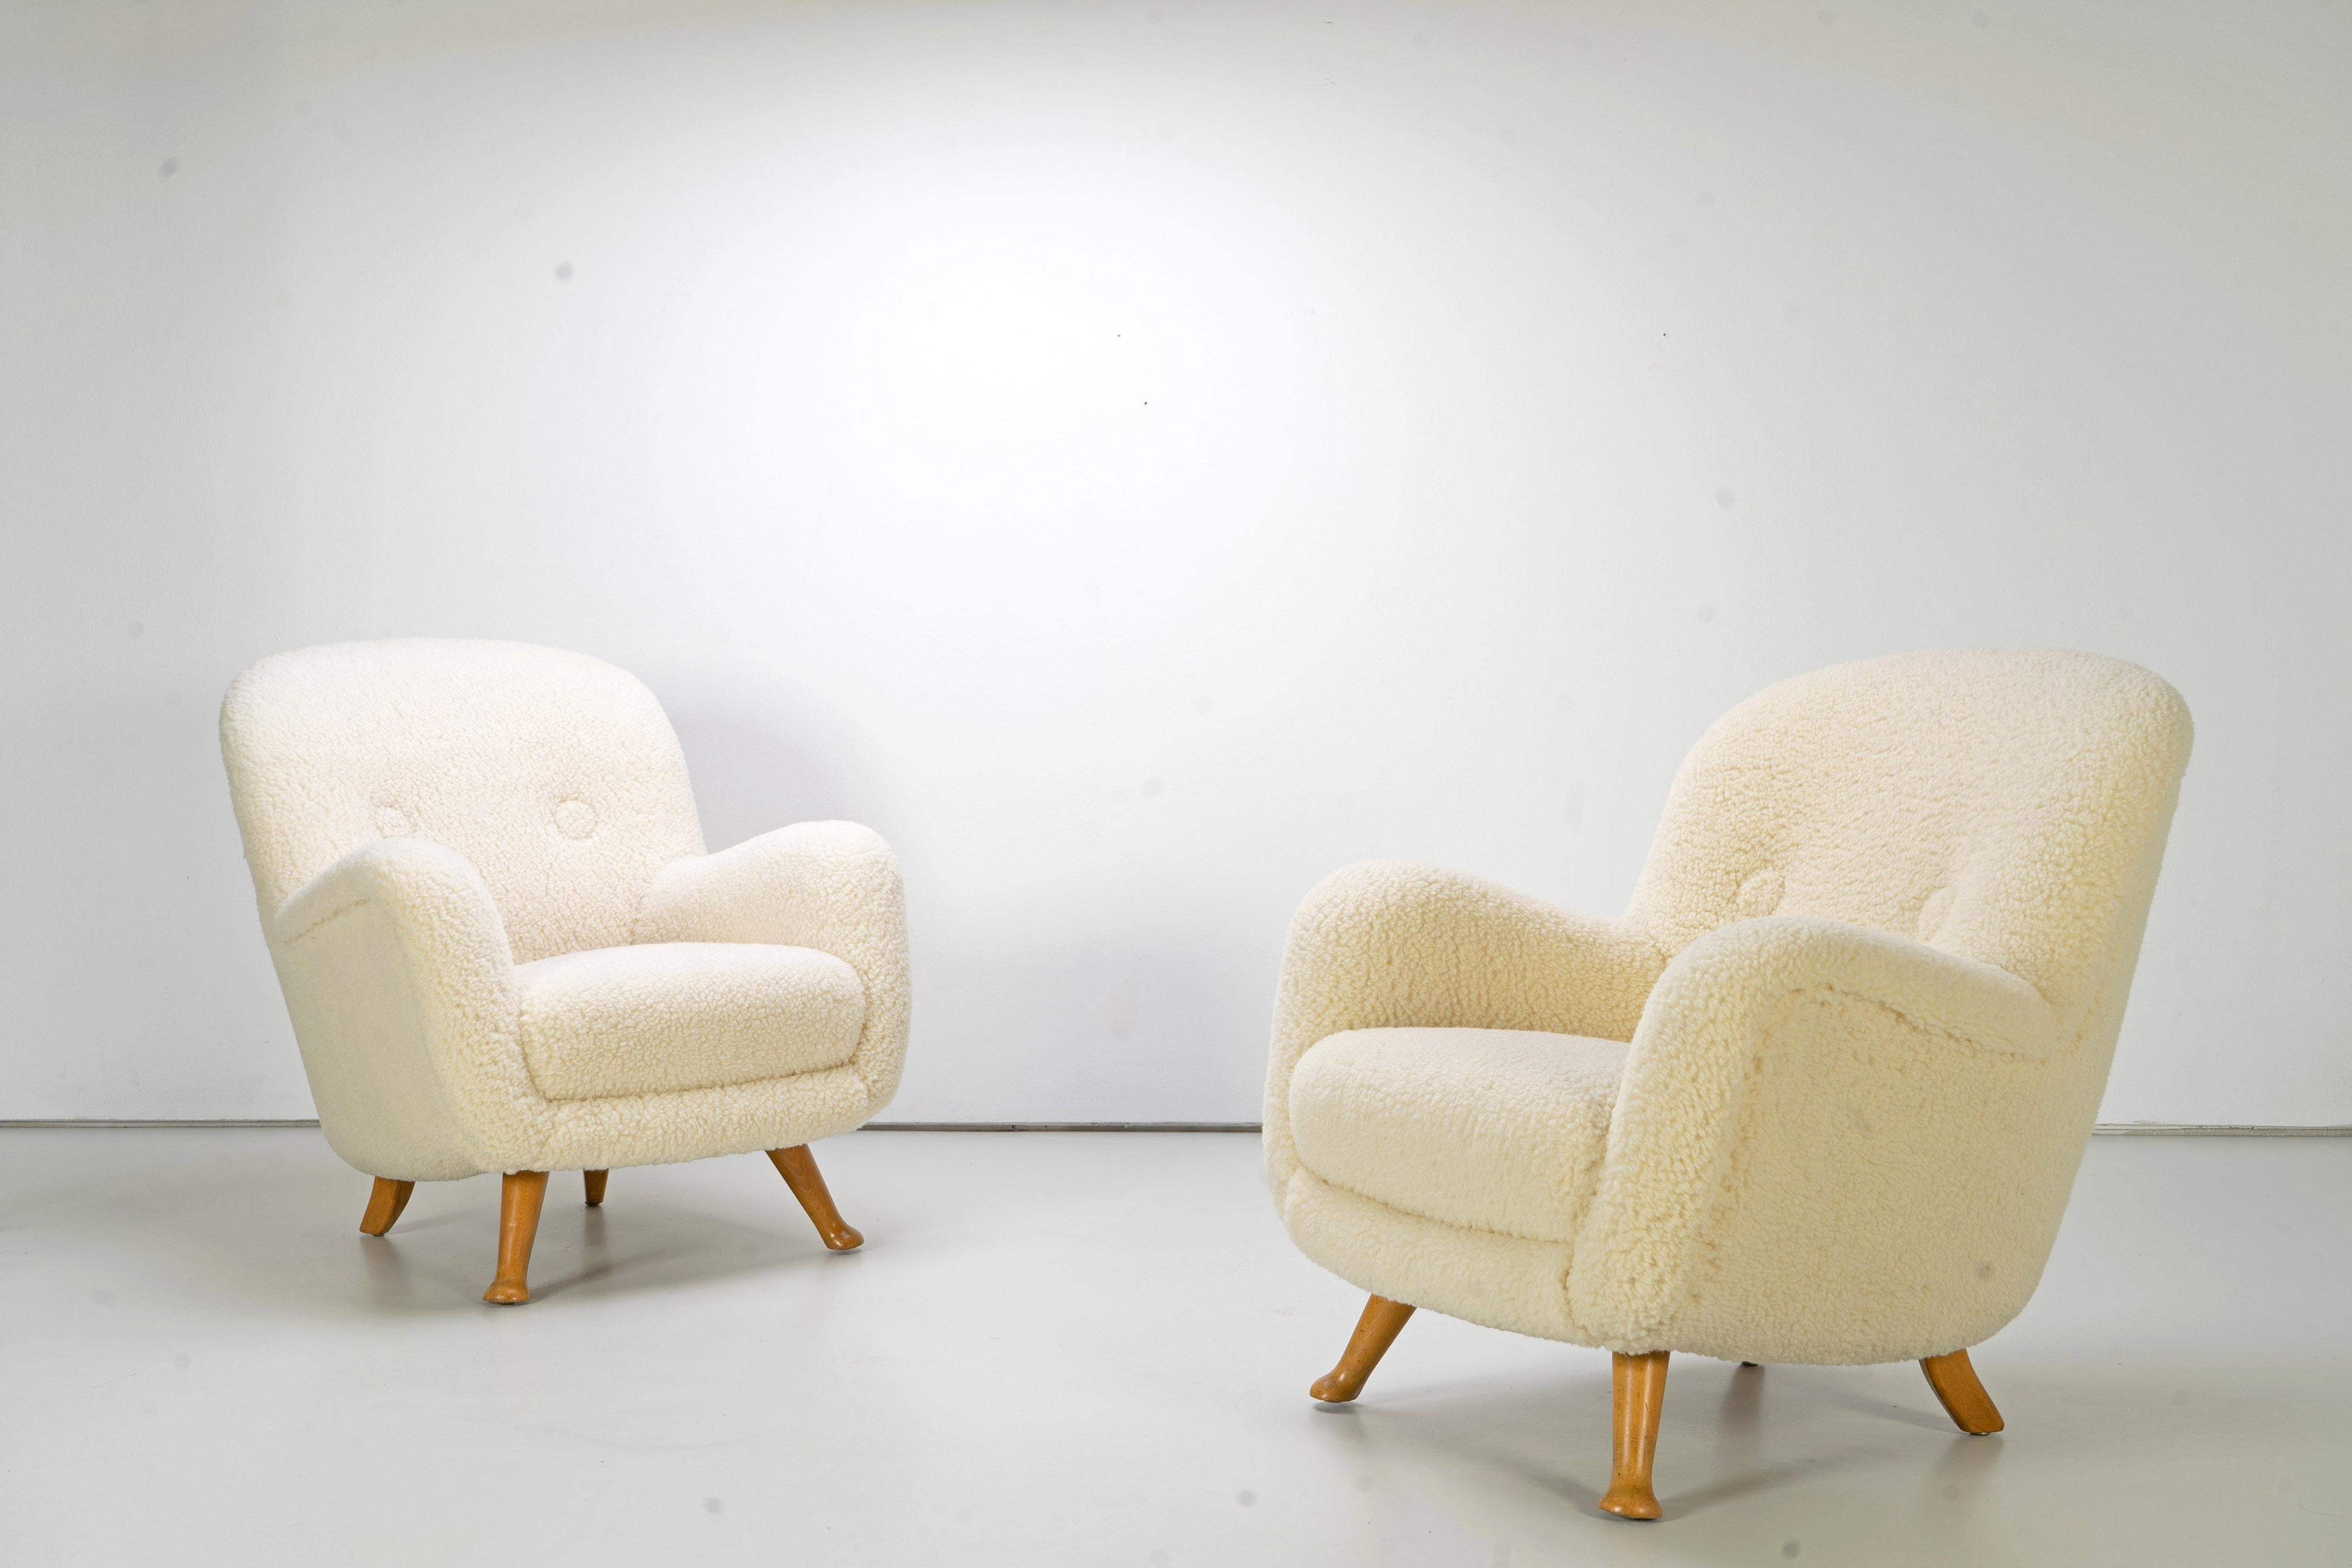 Beautiful pair of Scandinavian Modern club/lounge chairs with organic features and a humorous twist by Berga Møbler. The chairs have been newly upholstered.